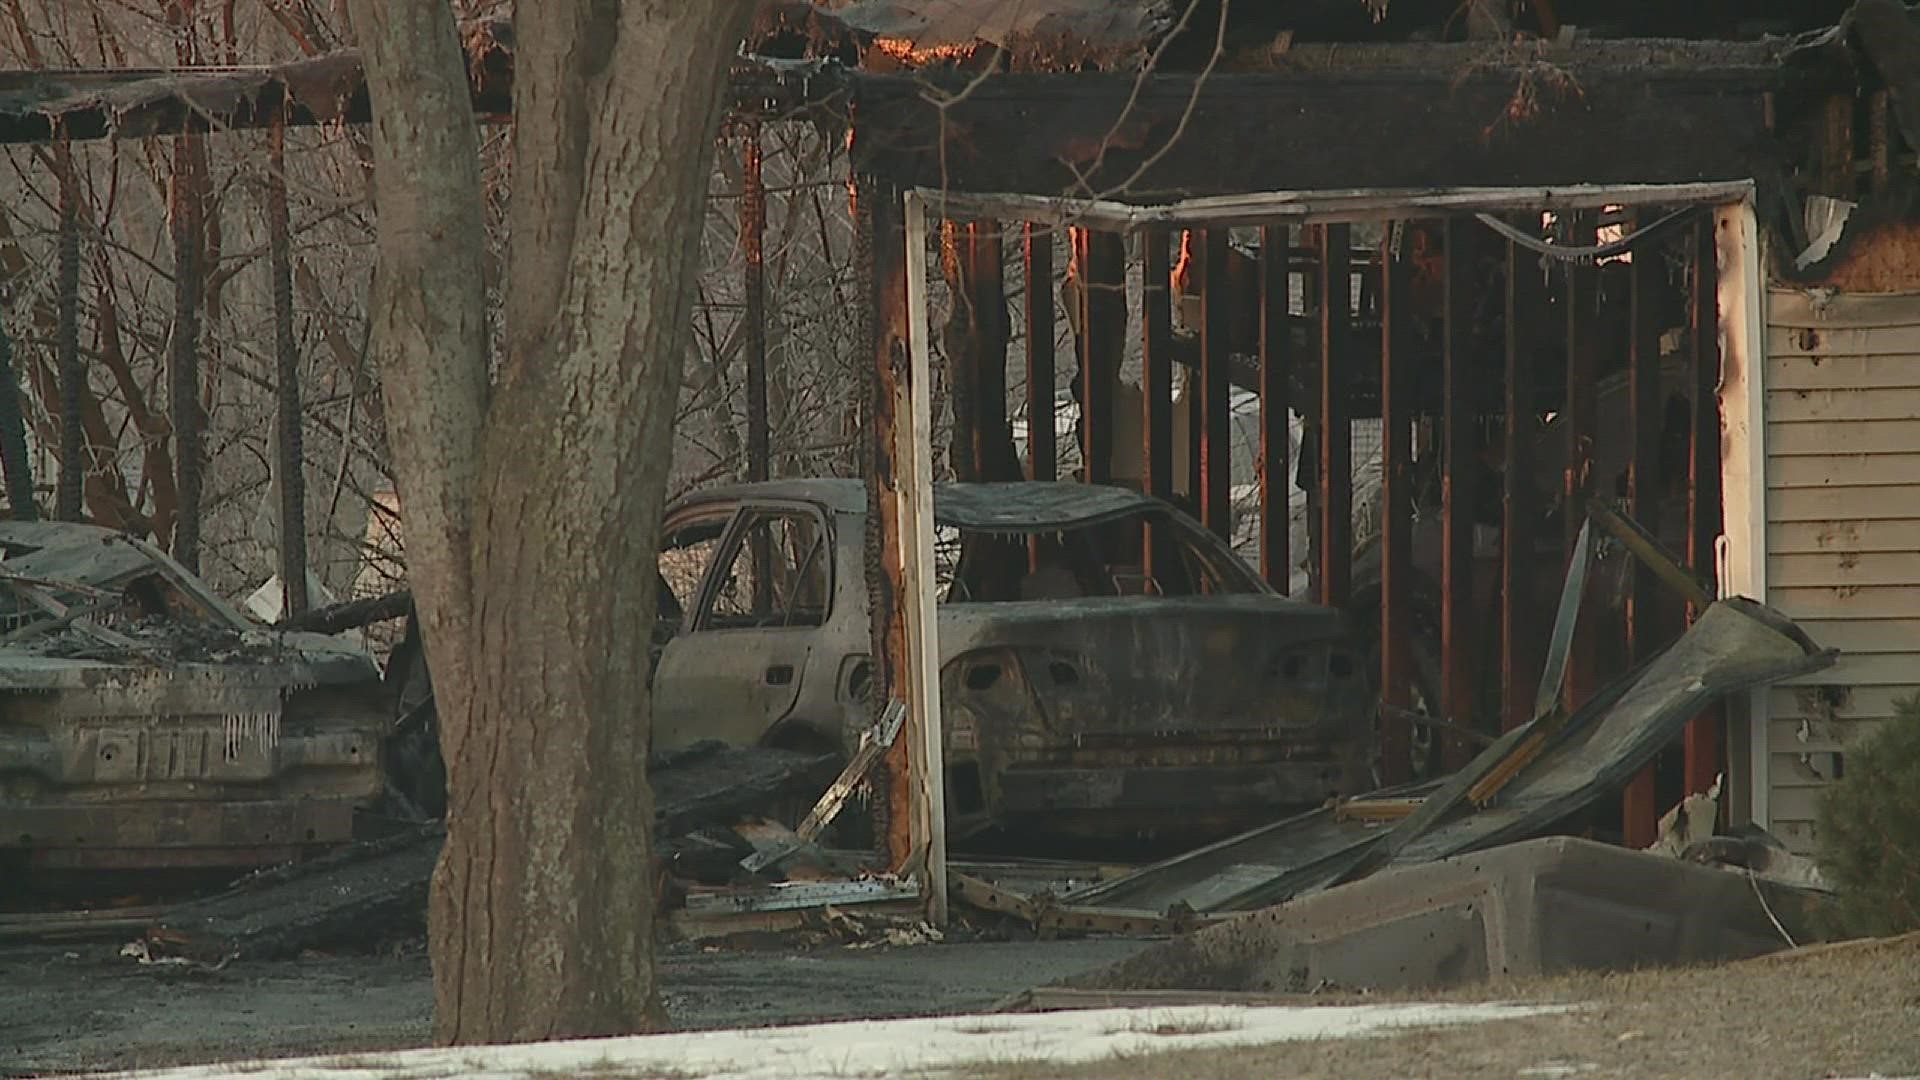 One person was found dead in a car after a severe garage fire at a Davenport apartment complex.